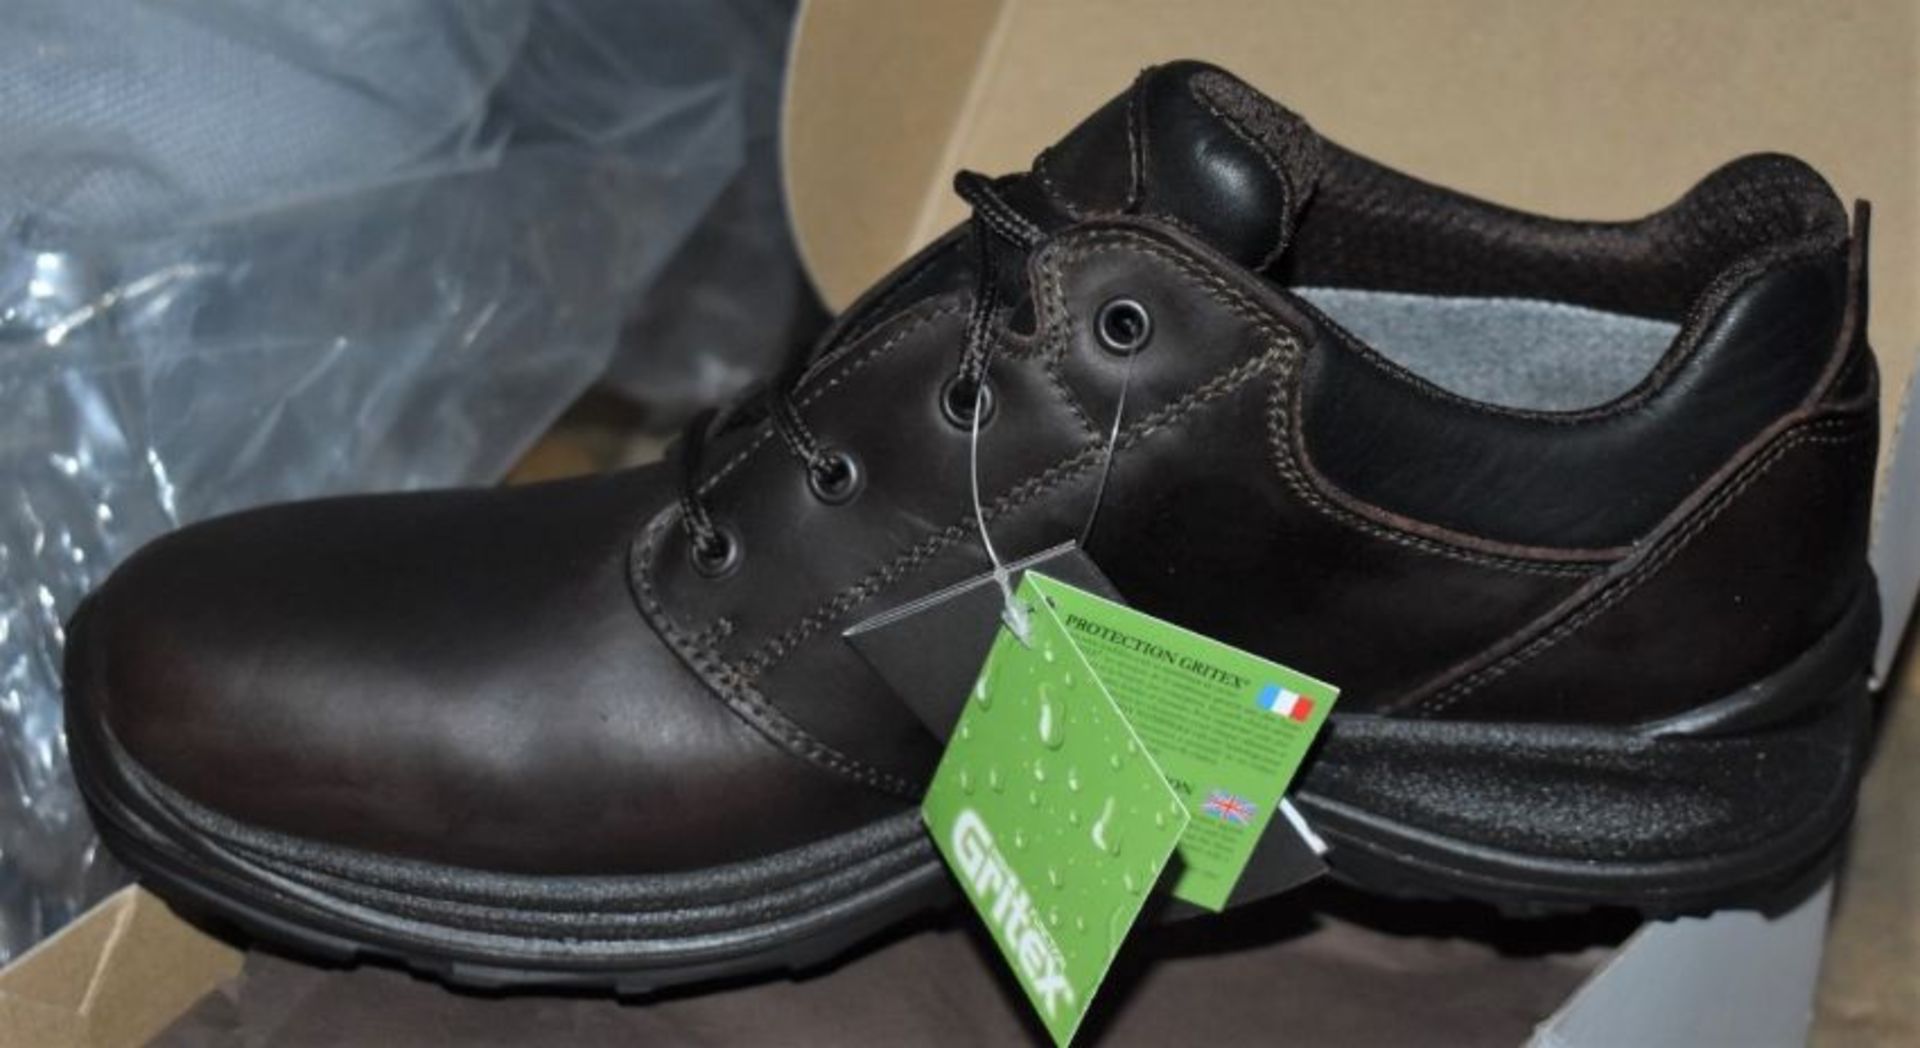 1 x Pair of Men's Grisport Brown Leather GriTex Shoes - Rogerson Footwear - Brand New and Boxed - - Image 3 of 5